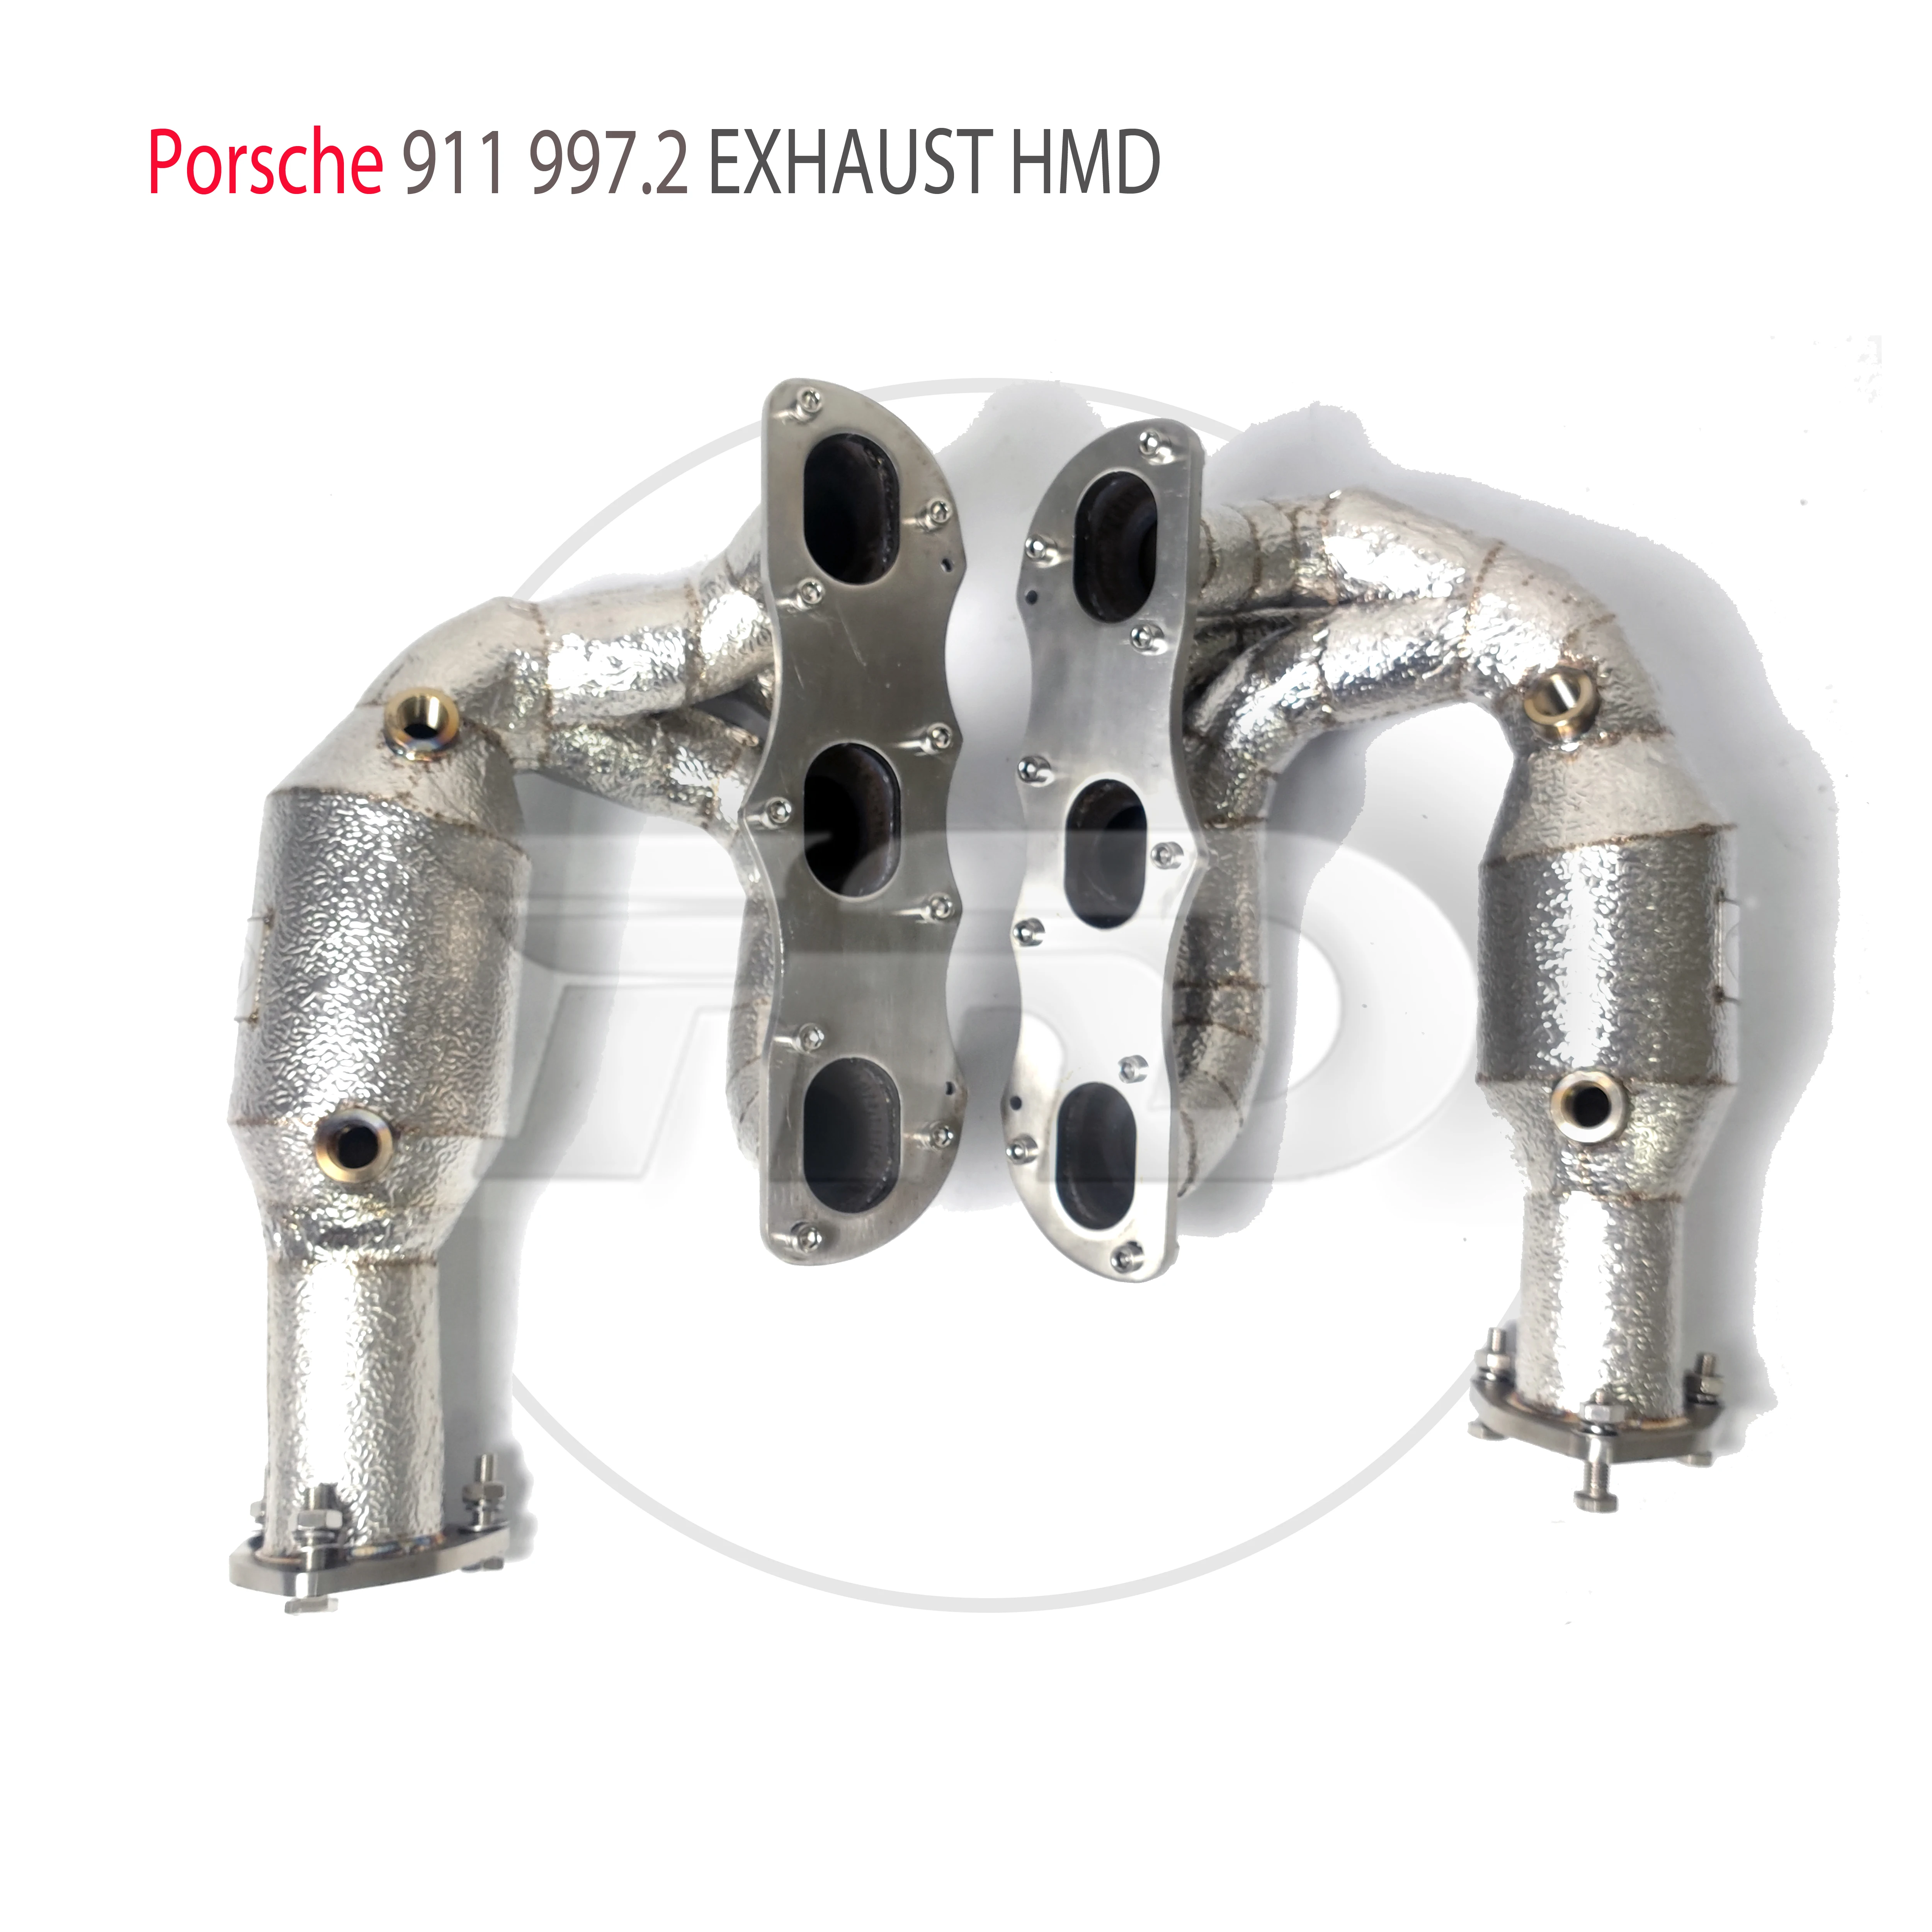 

HMD Exhaust Manifold High Flow Downpipe for Porsche 911 997.2 Car Accessories With Catalytic Header Without Cat Catless Pipe